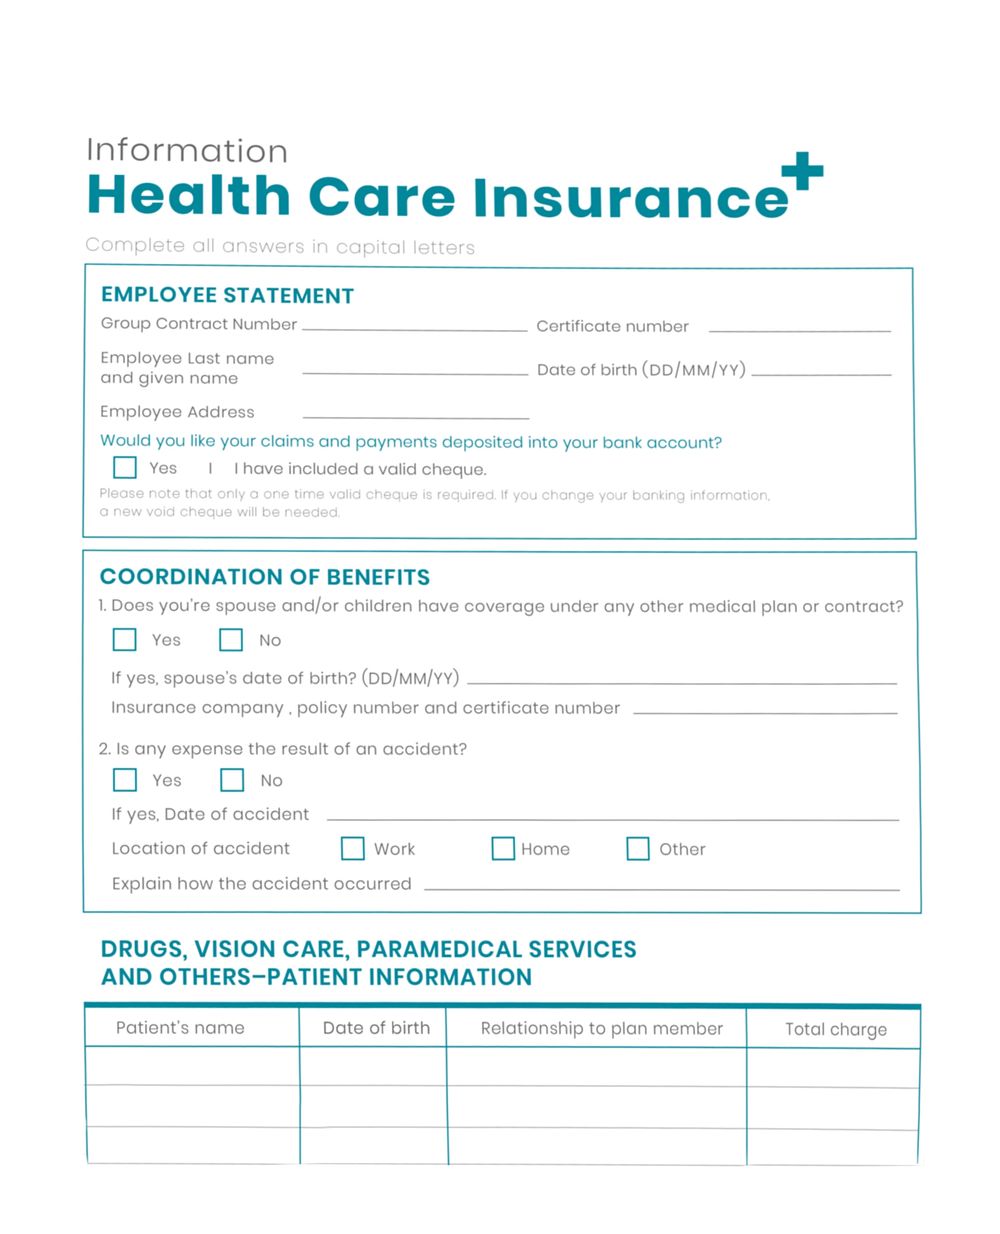 Health care insurance background